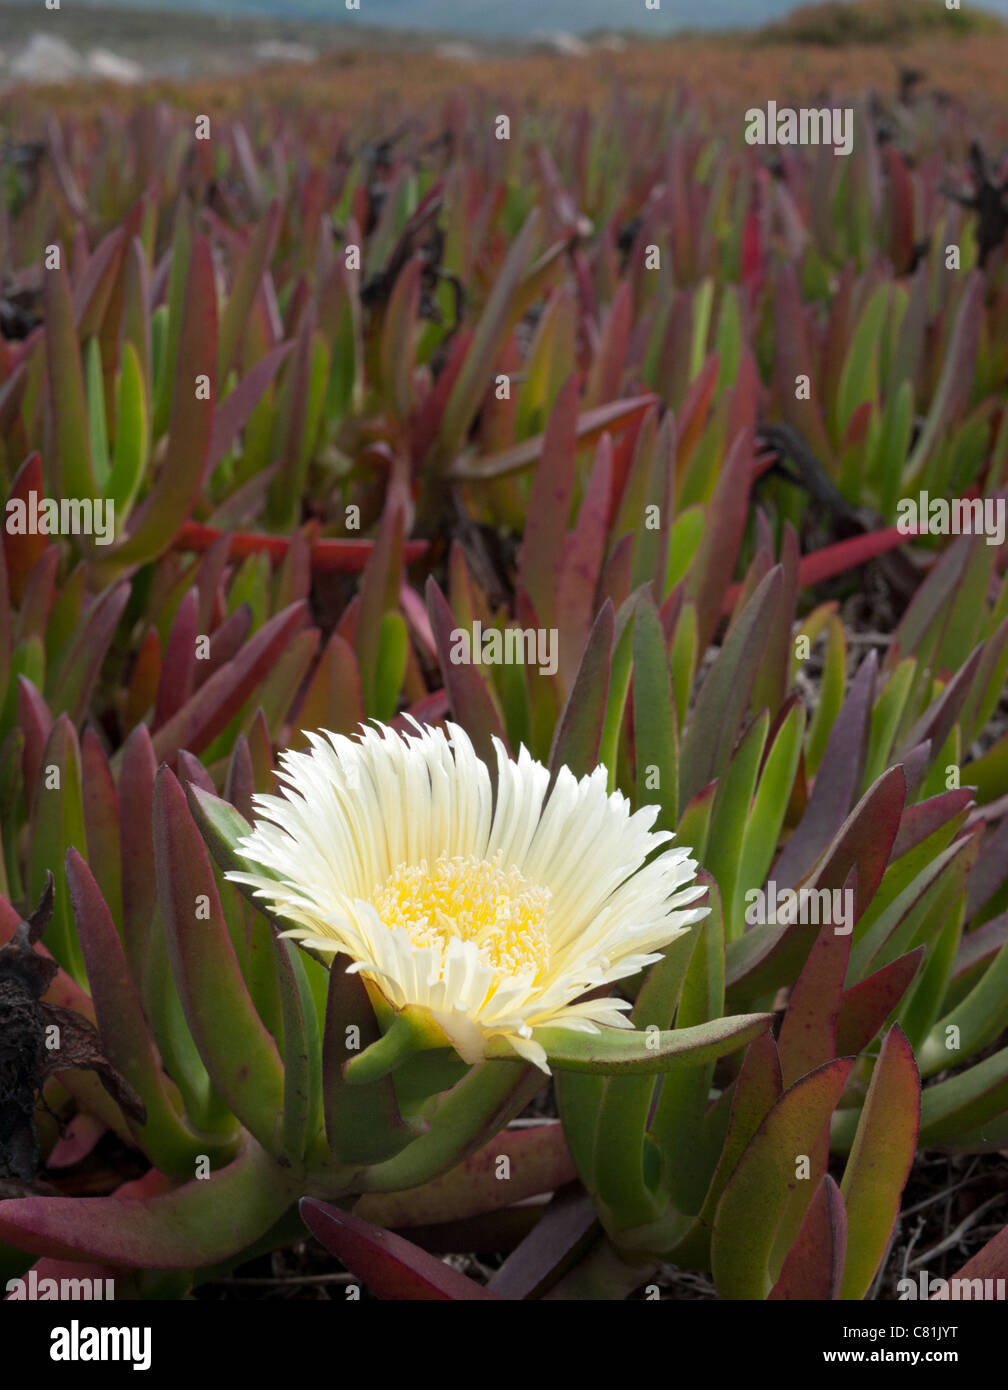 A Hottentot fig (Carpobrotus edulis) flower at Cabo da Roca in Portugal. The plant is an invasive species from South Africa. Stock Photo